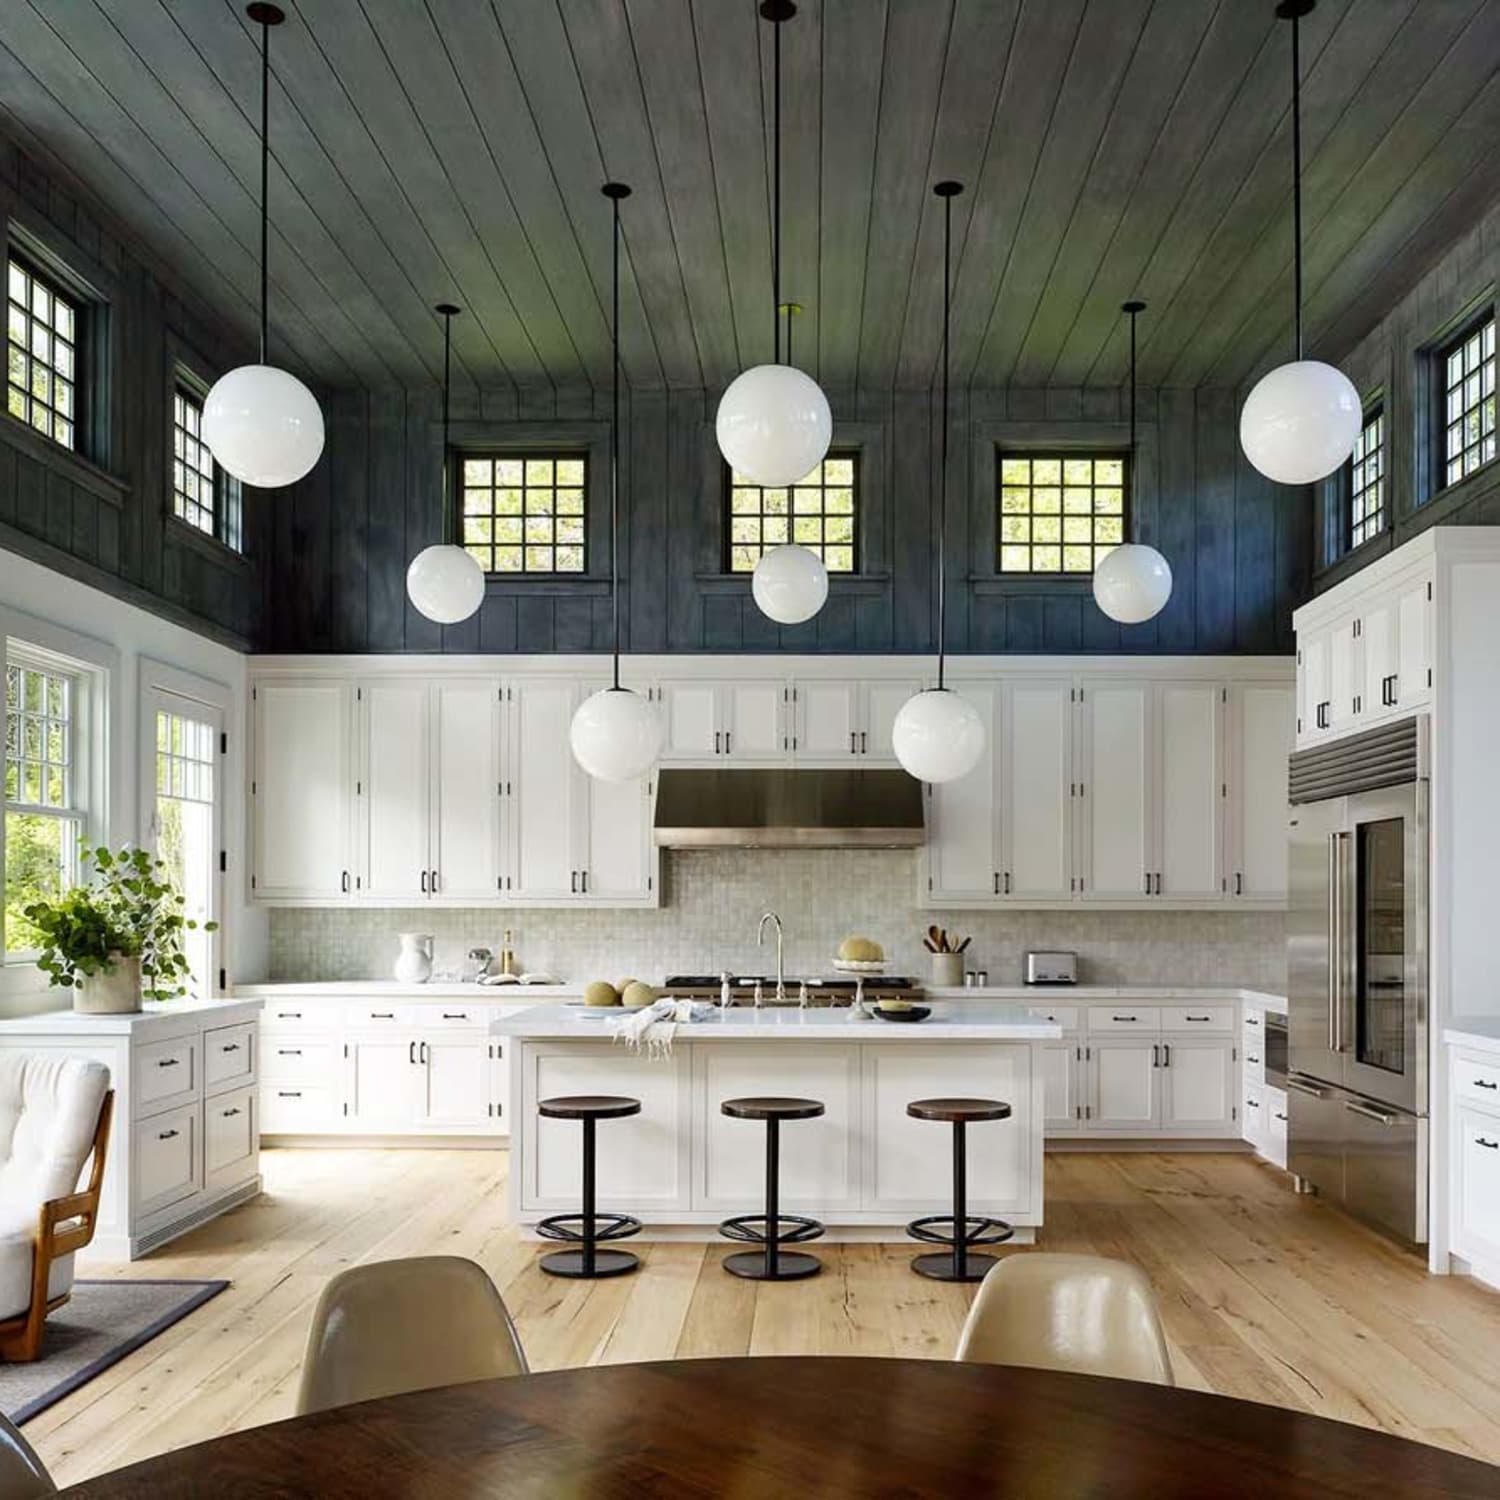 Shiplap Style Planks On The Ceiling Look We Love